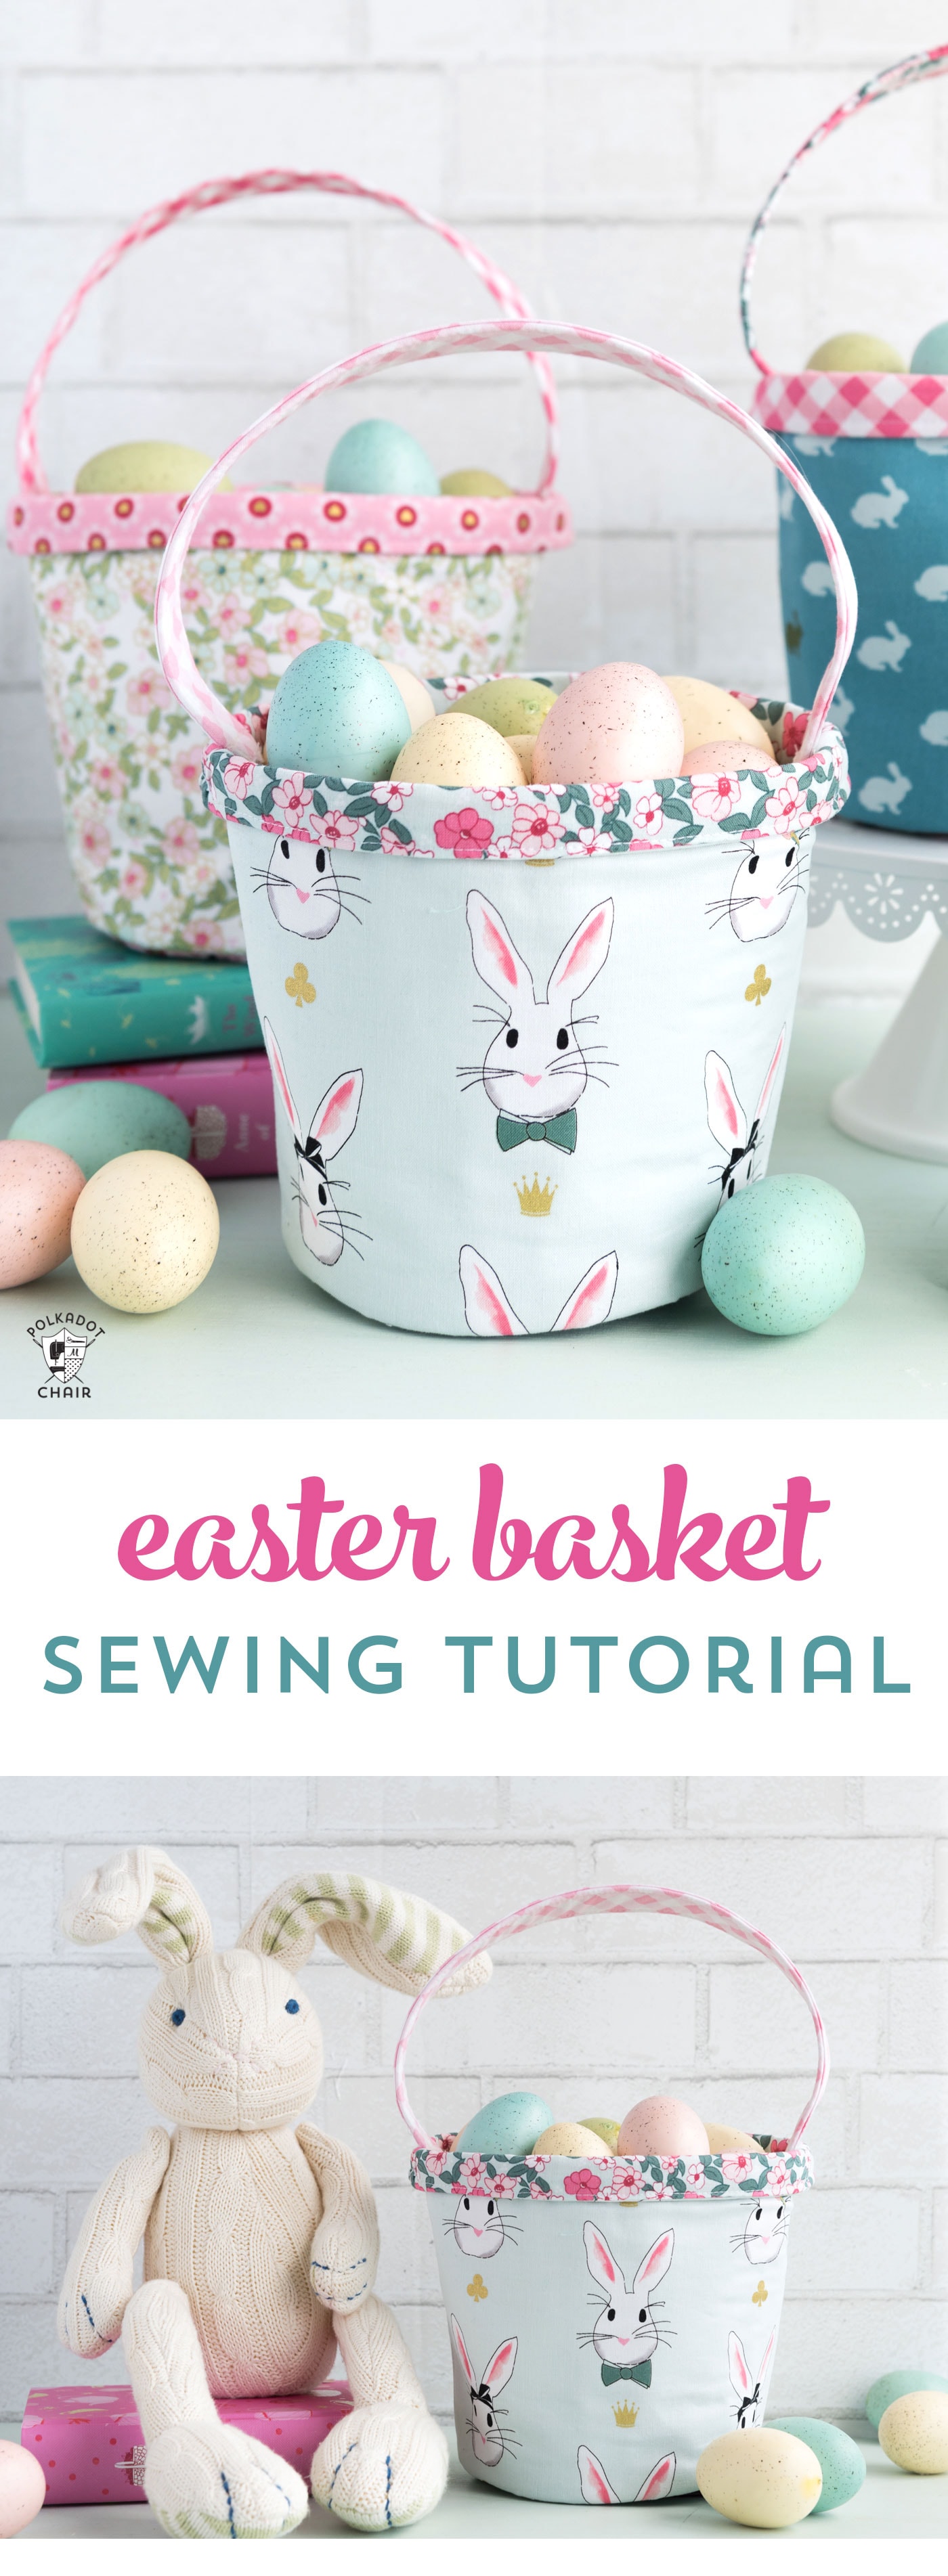 Free Easter Basket sewing tutorial - a cute little fabric basket perfect for Spring!